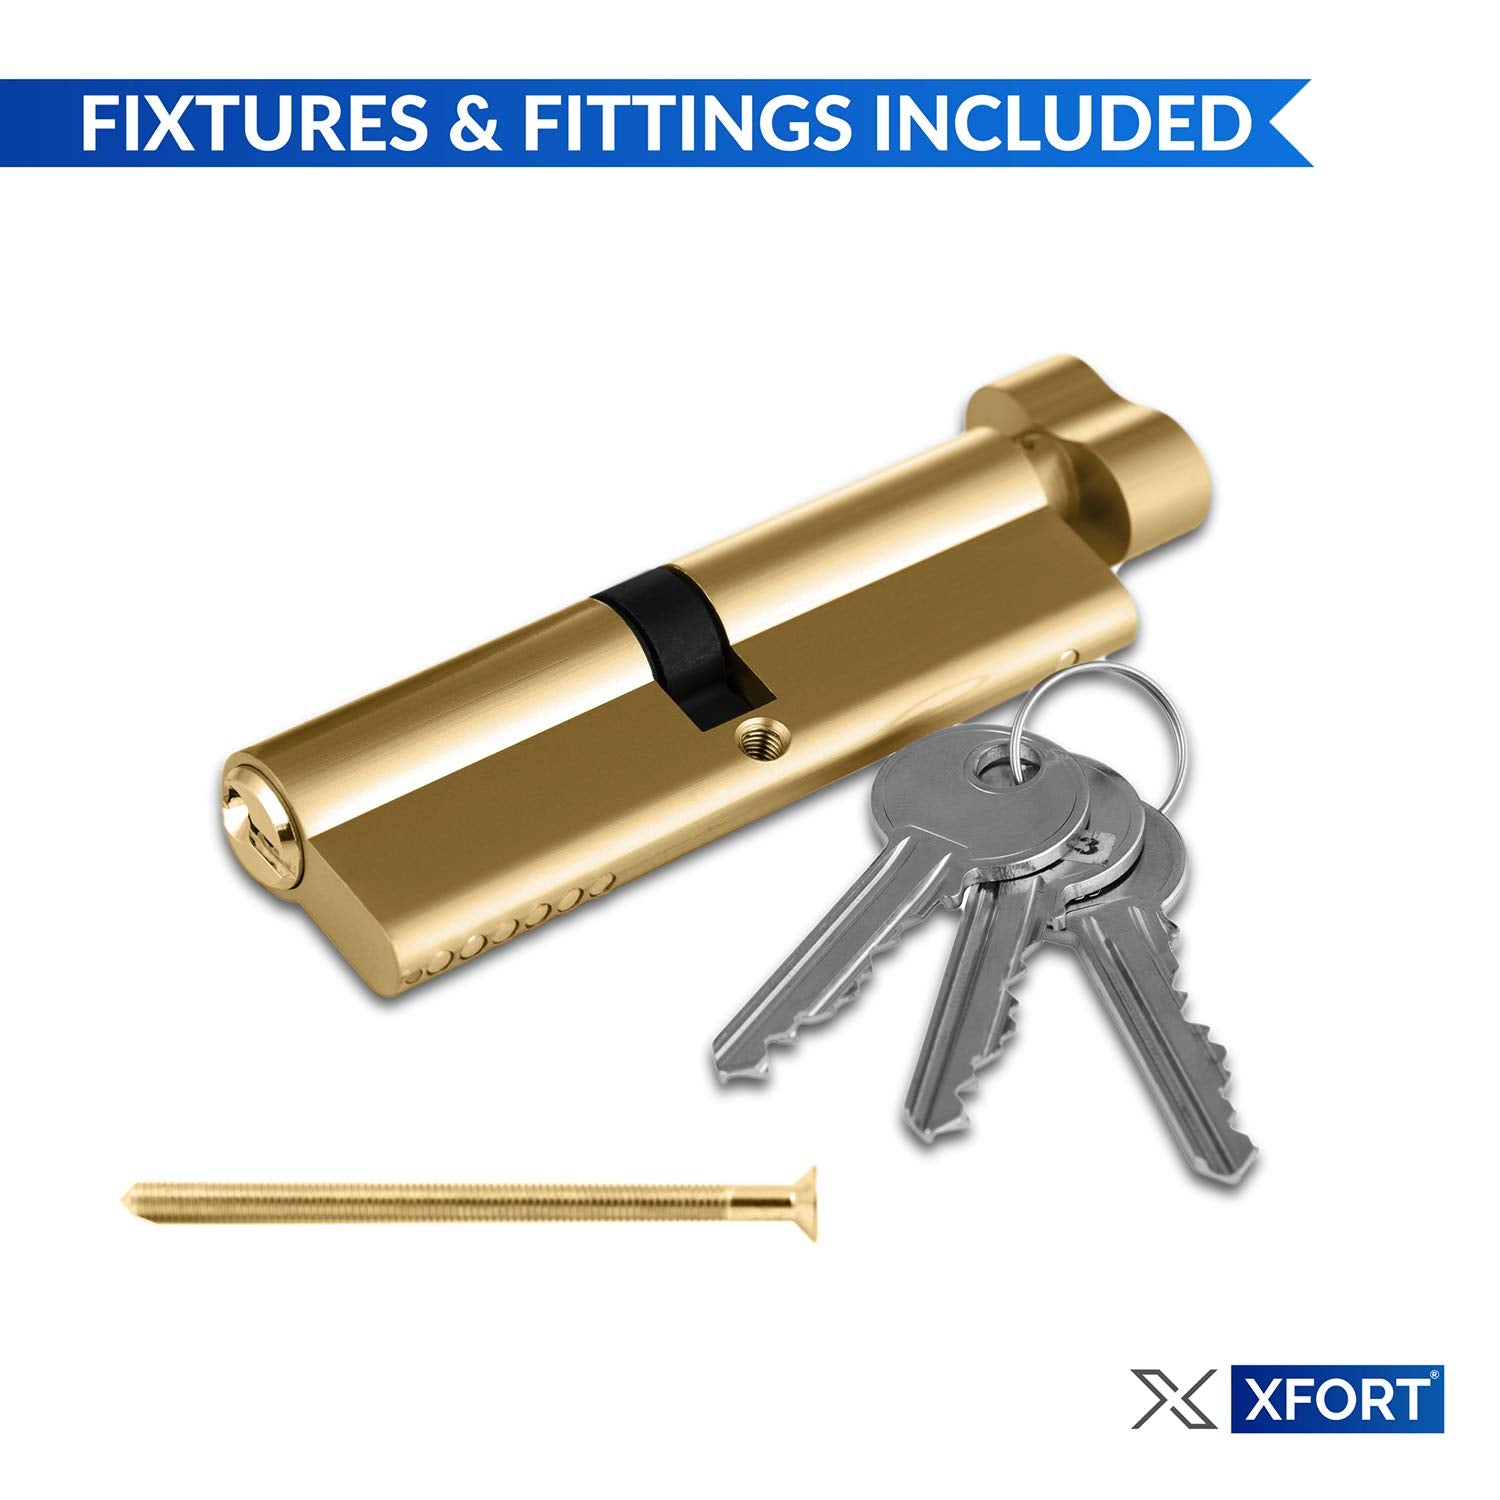 XFORT® Brass 50T/50 Thumb Turn Euro Cylinder Lock (100mm), Euro Door Barrel Lock with 3 Keys, Anti-Bump, Anti-Drill, Anti-Pick Door Lock with Key, High Security for Wooden, UPVC and Composite Doors.